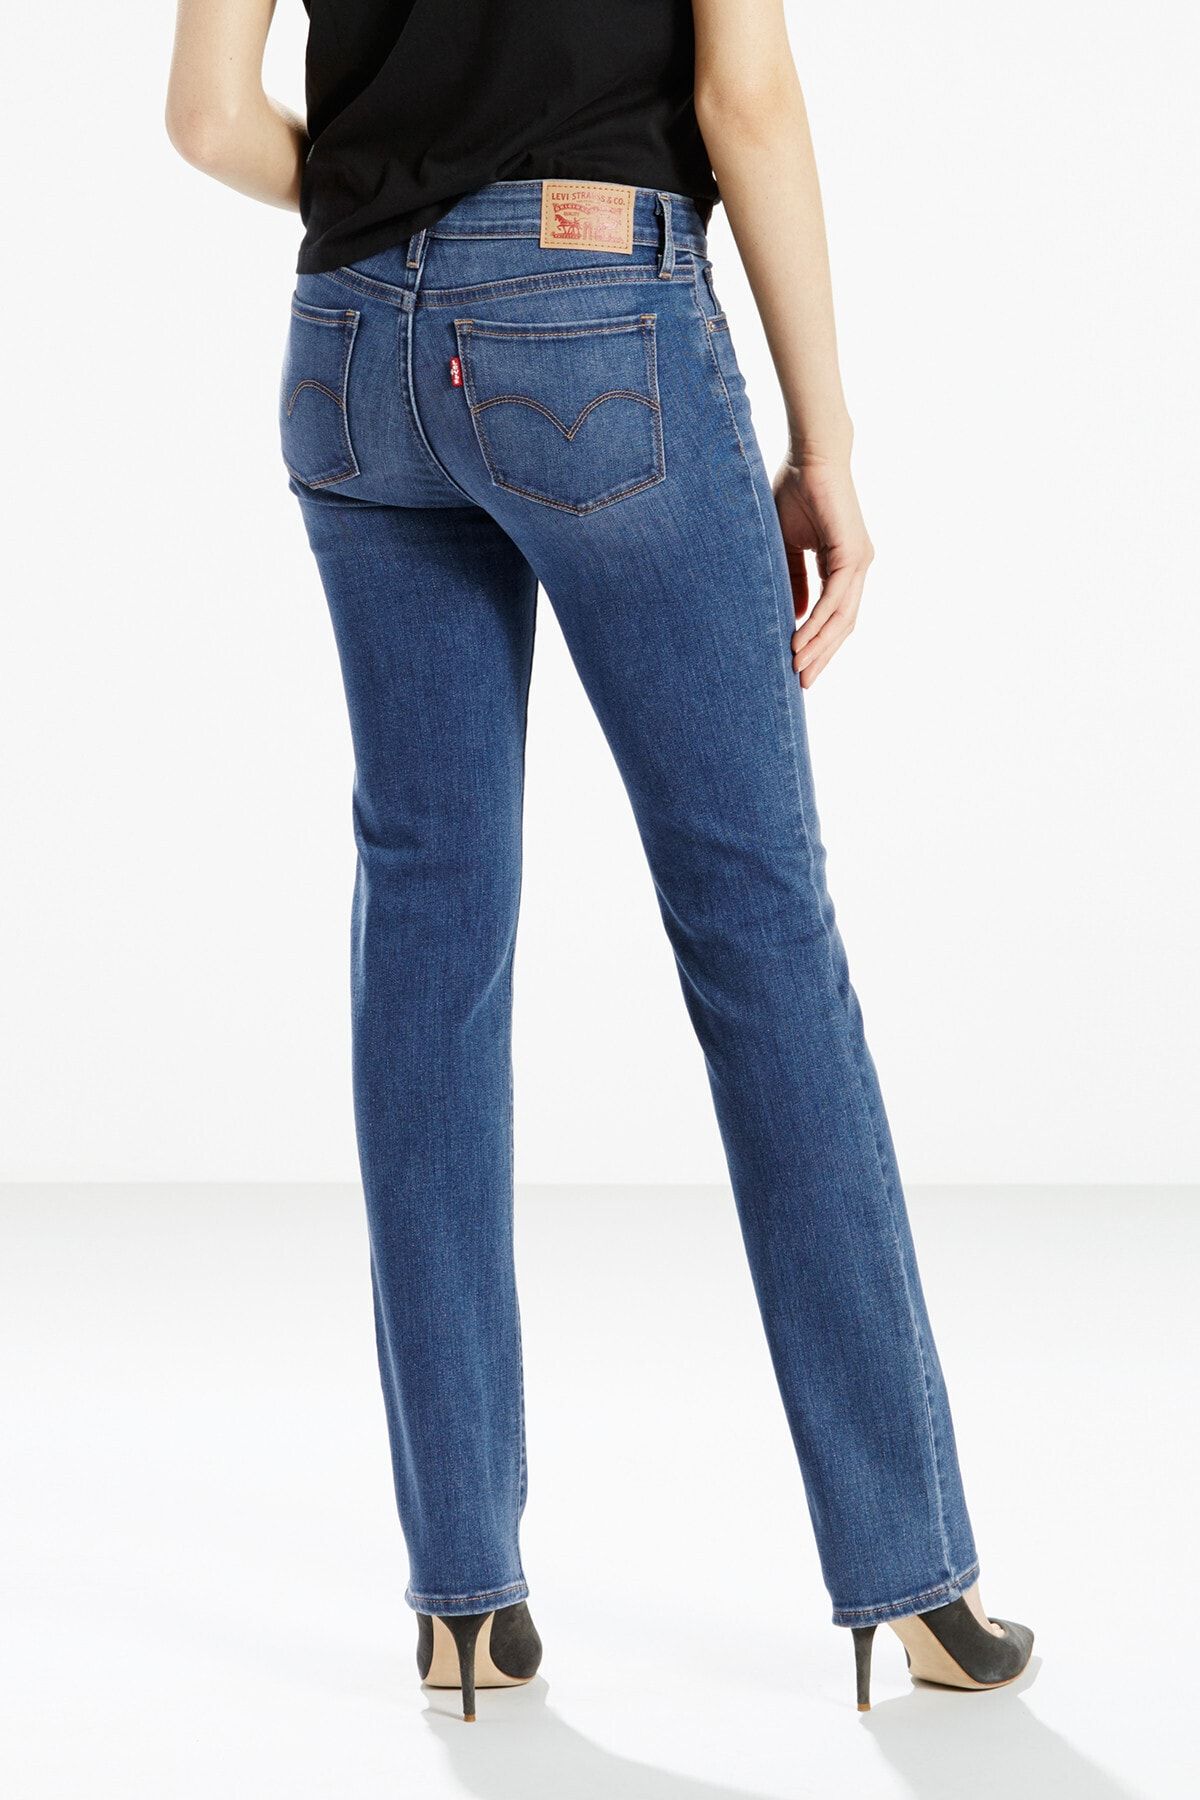 levi's jeans 714 straight - Hot Sale Online - Up To 63% Off